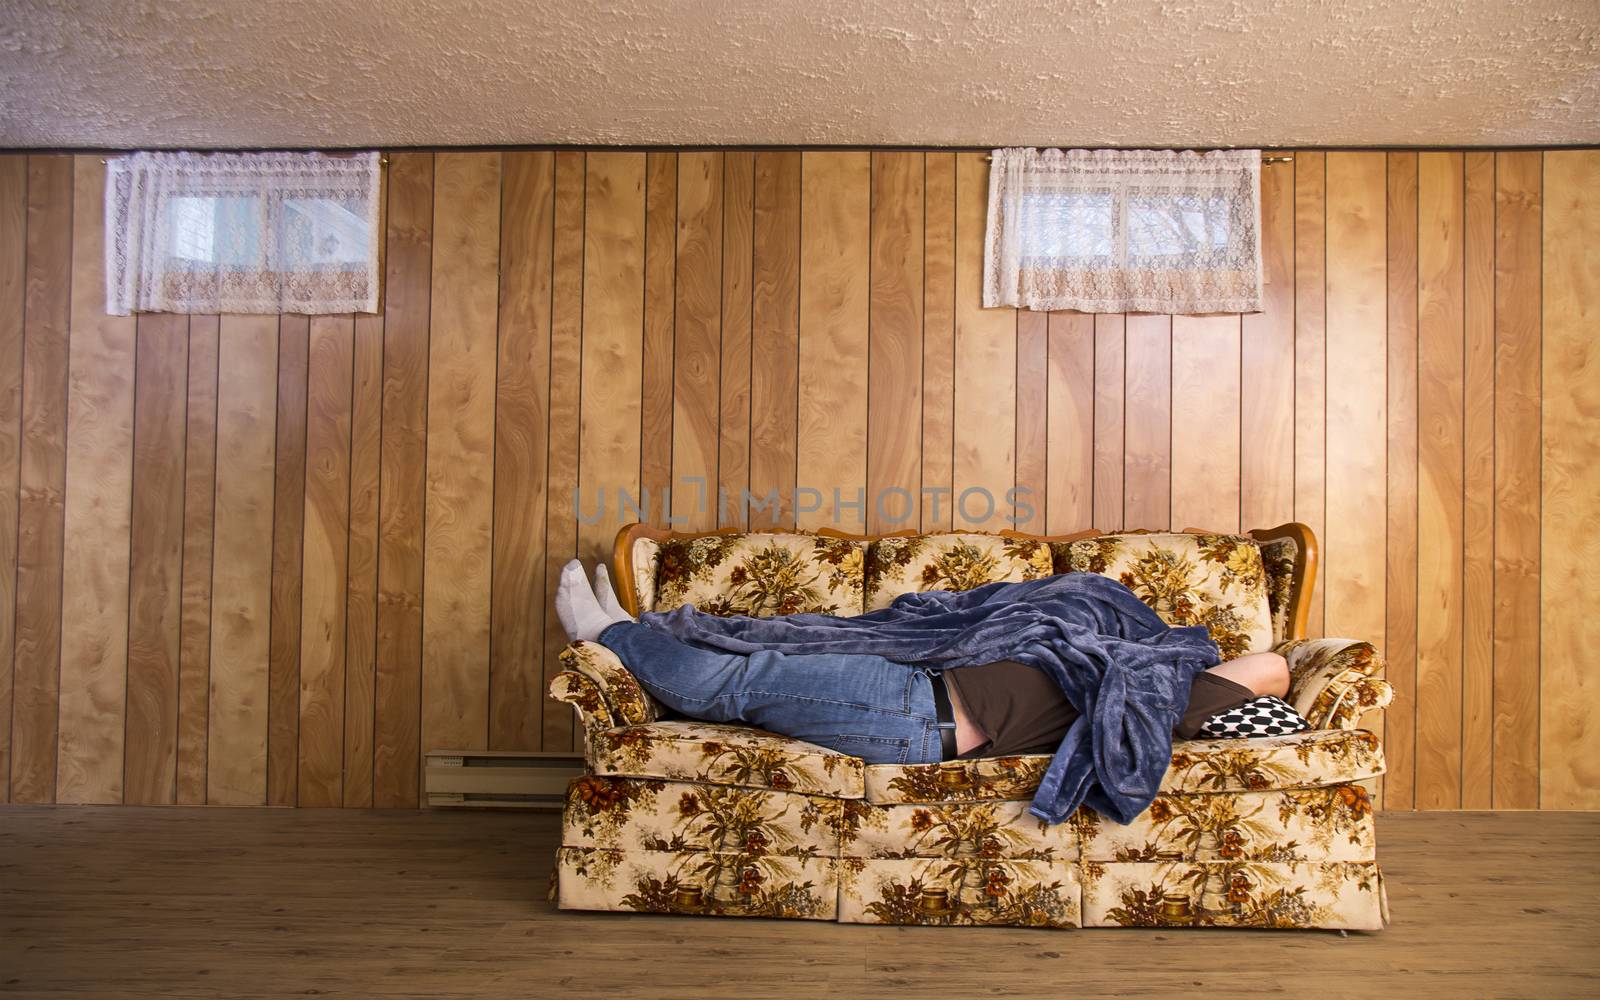 man wearing jeans, sleeping on his back, on an old basement couch